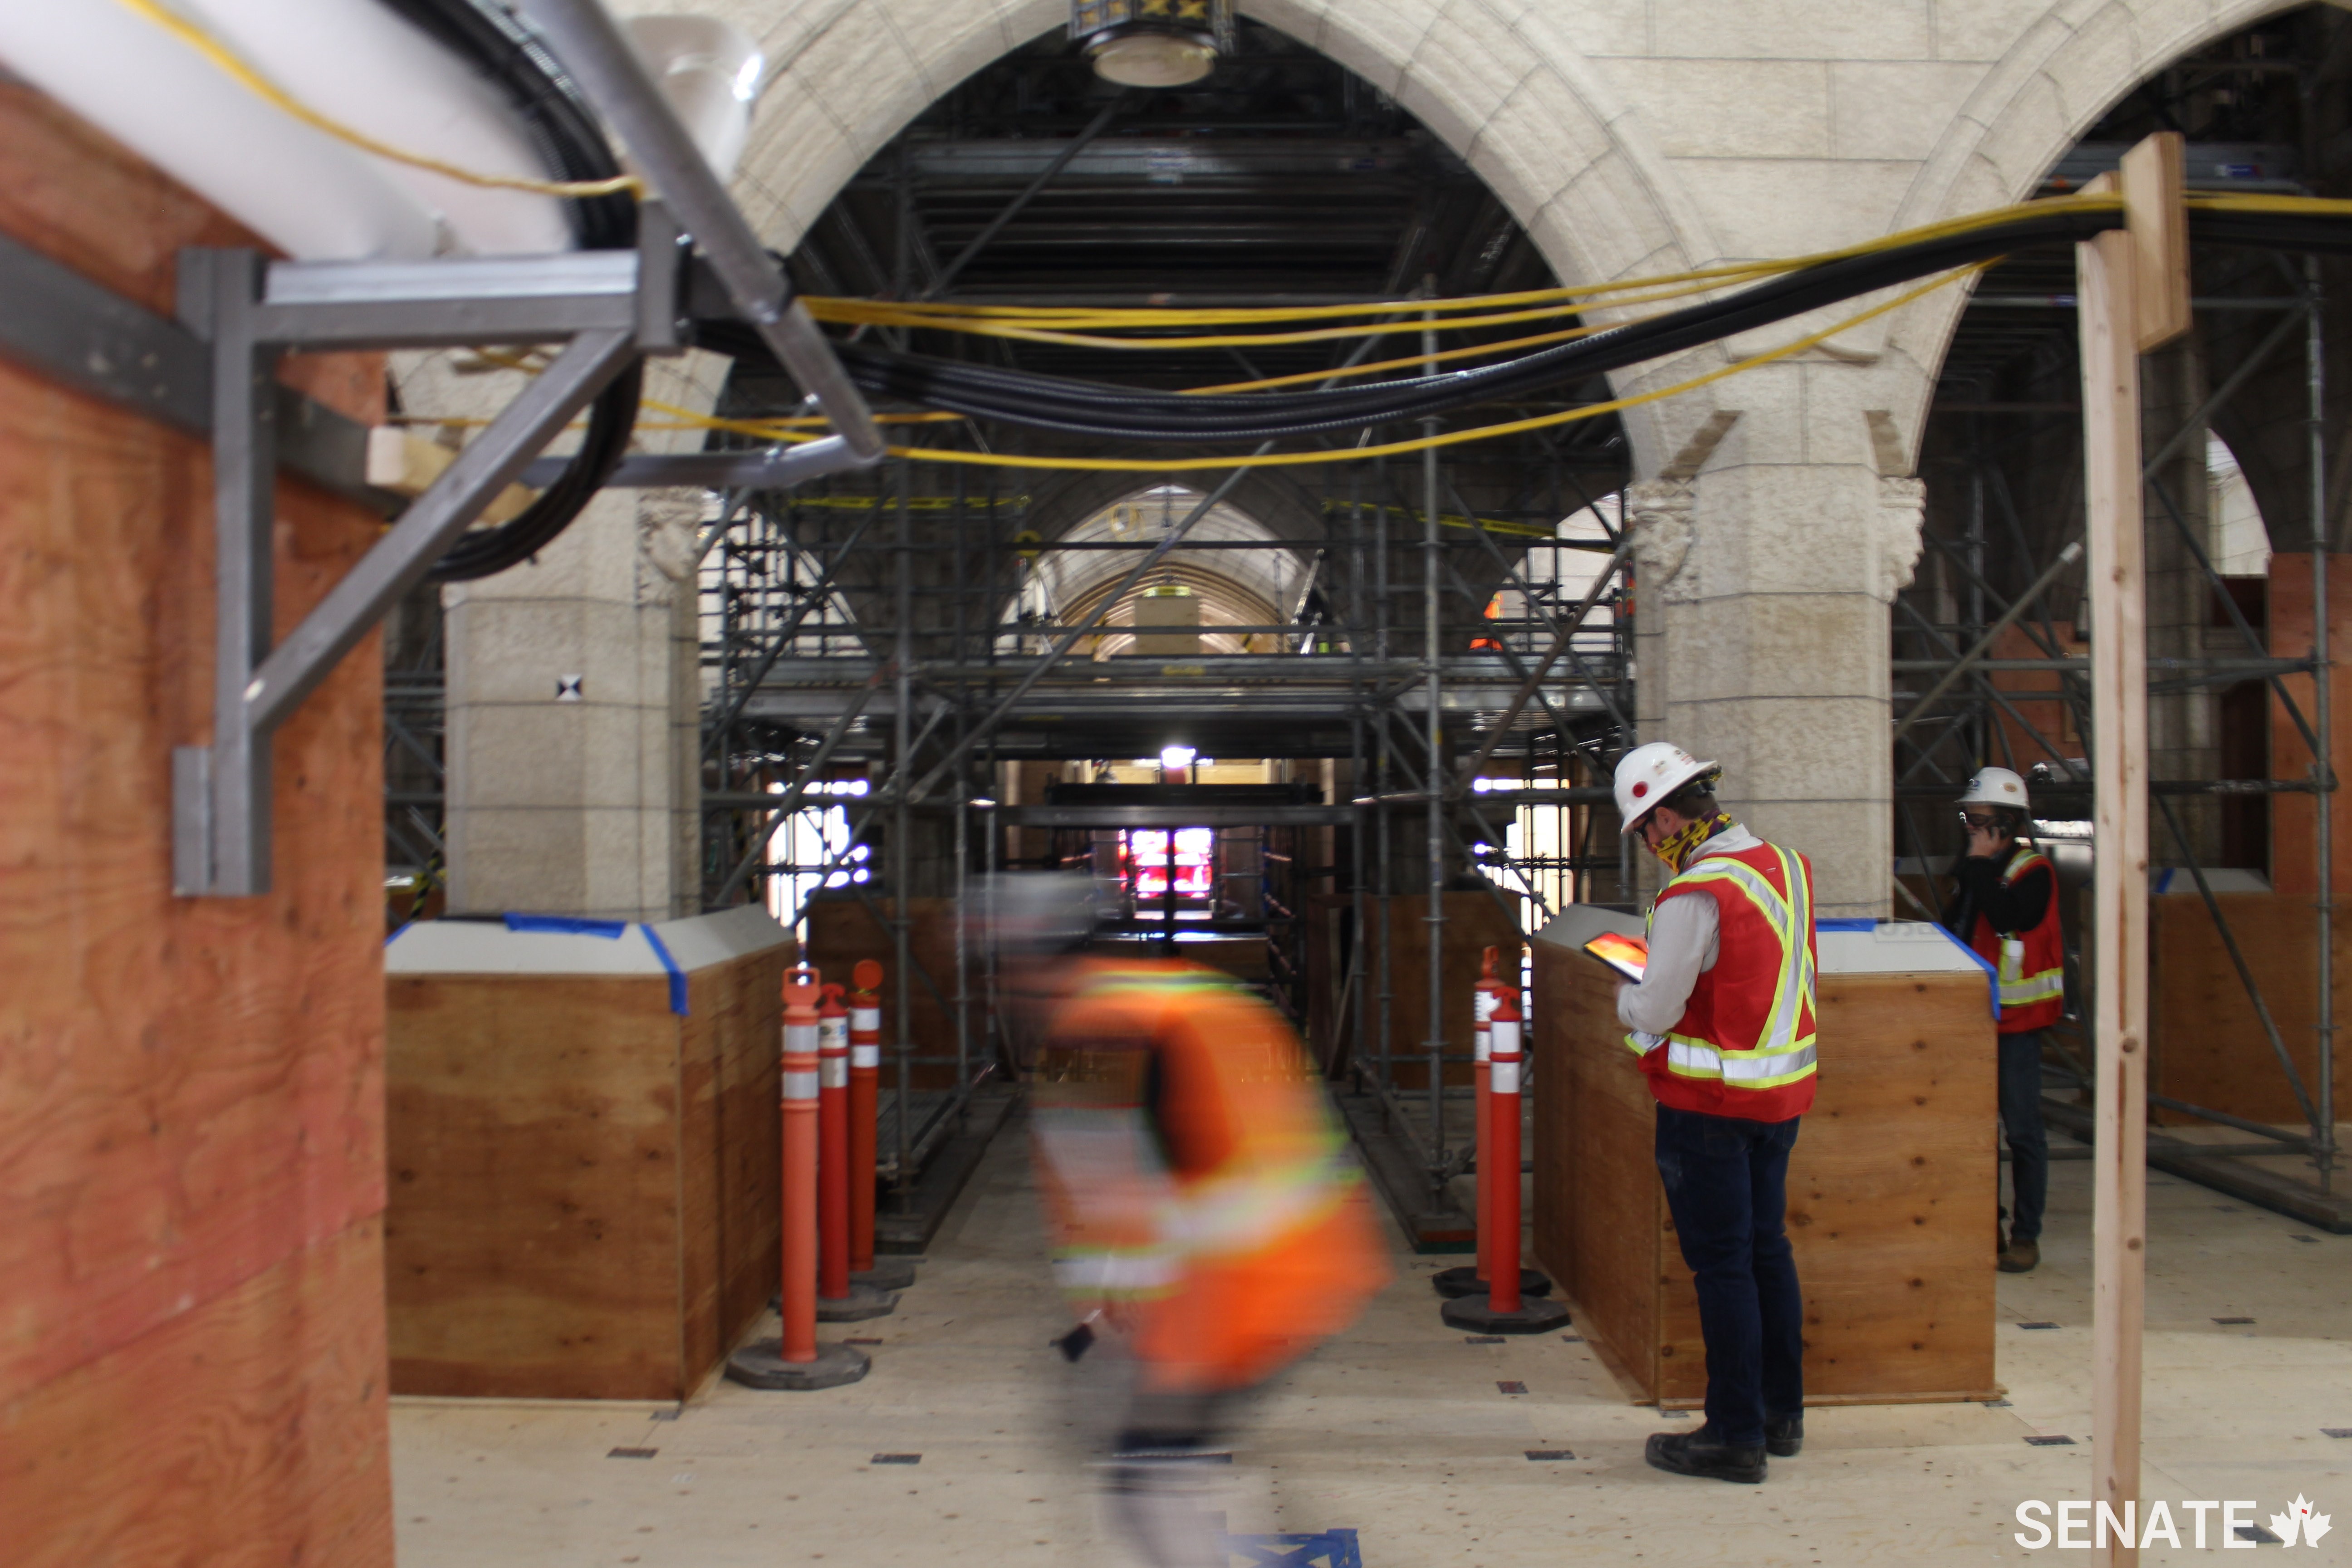 The Senate foyer looks a bit different than it used to. Plywood cladding has been used to protect Centre Block’s historic features during rehabilitation work, and scaffolding is everywhere. The Diamond Jubilee Window is just visible as a soft glow in the centre of the frame.